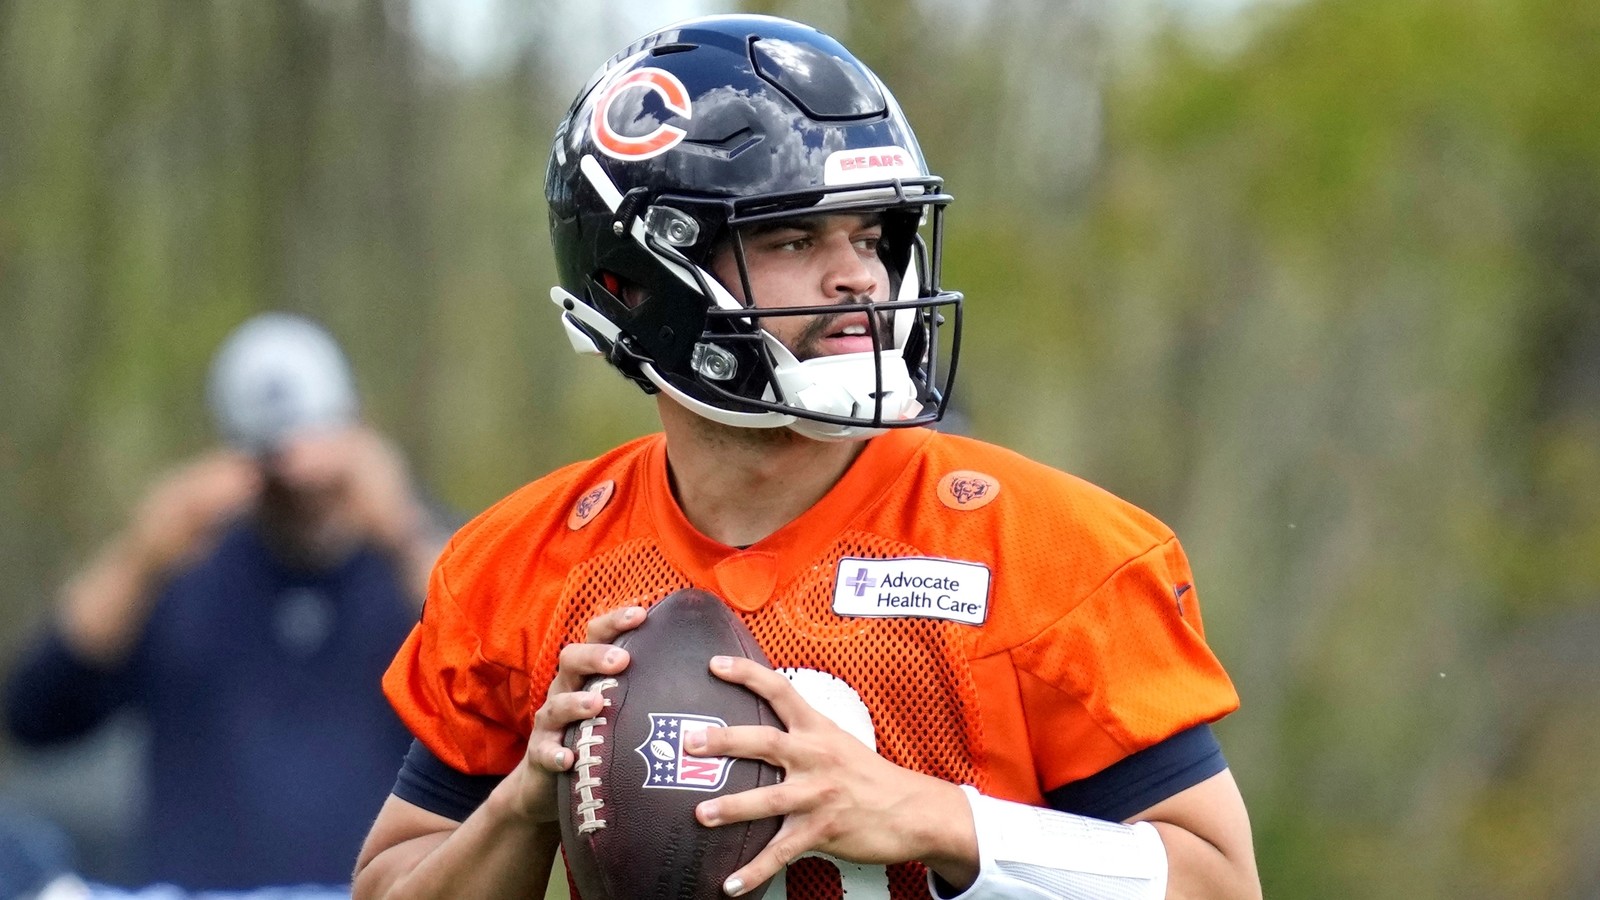 Chicago Bears selected for 'Hard Knocks: Training Camp' documentary series